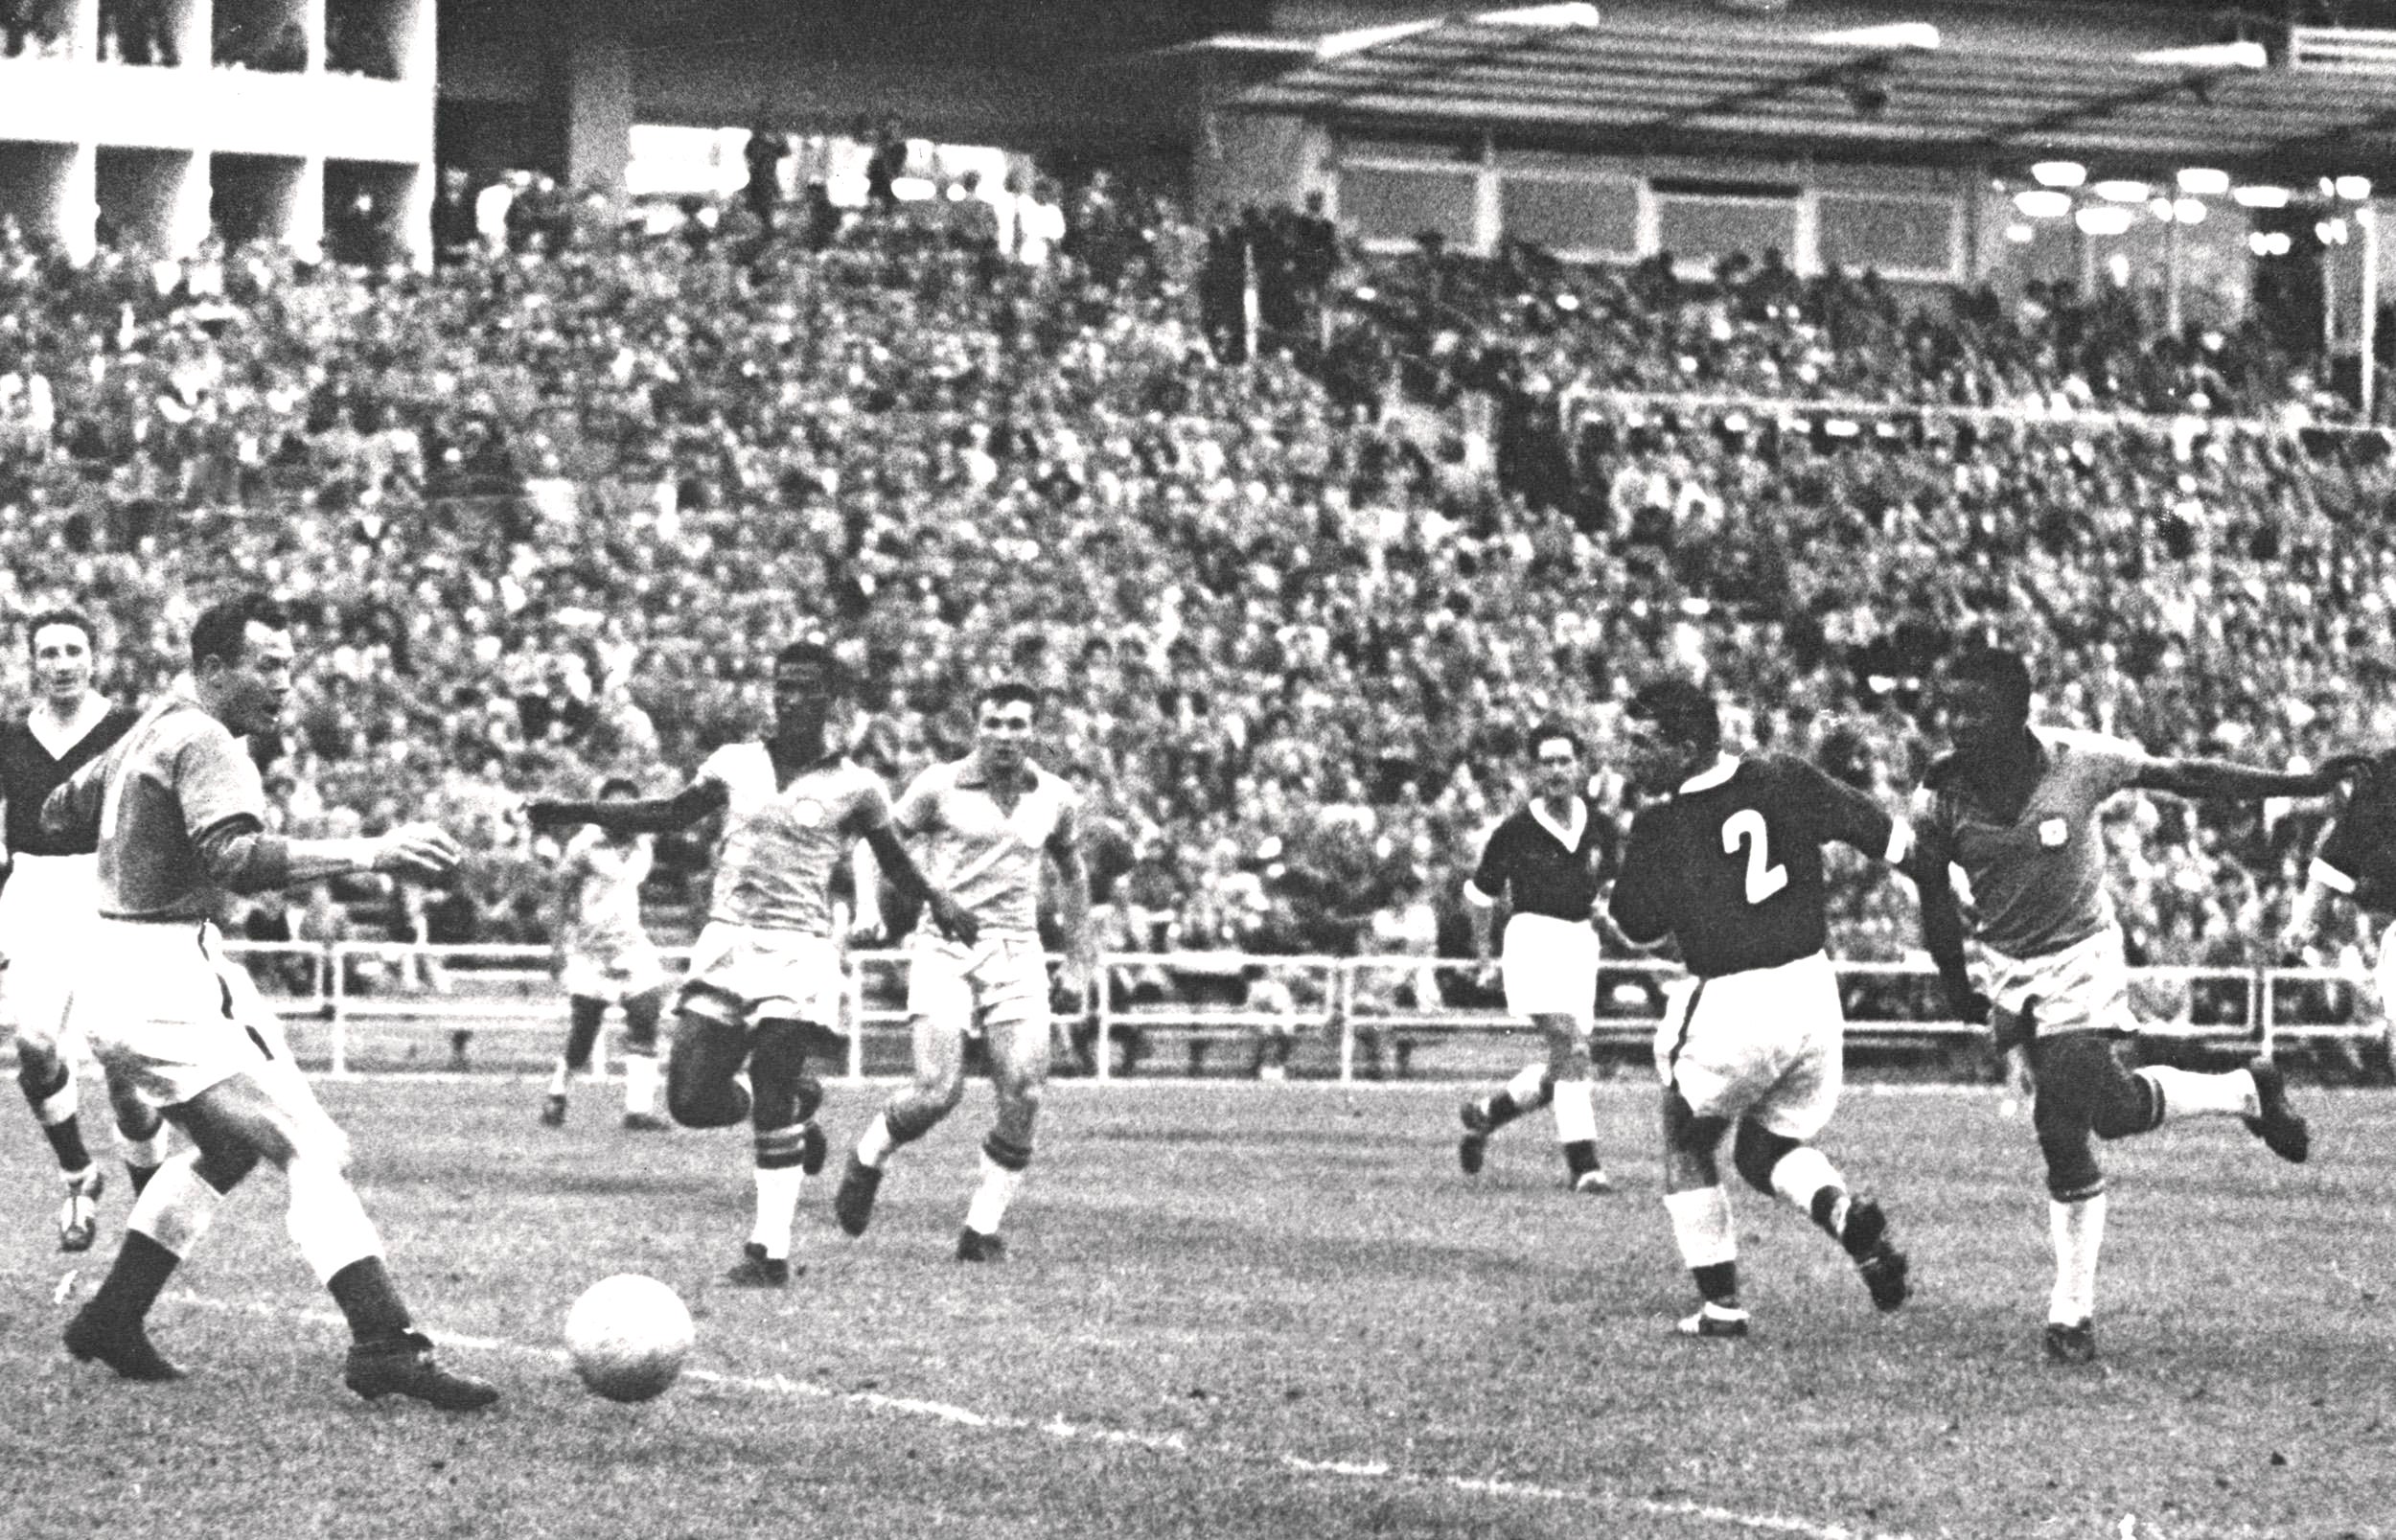 A 17-year-old Pele scores against Wales at the 1958 World Cup